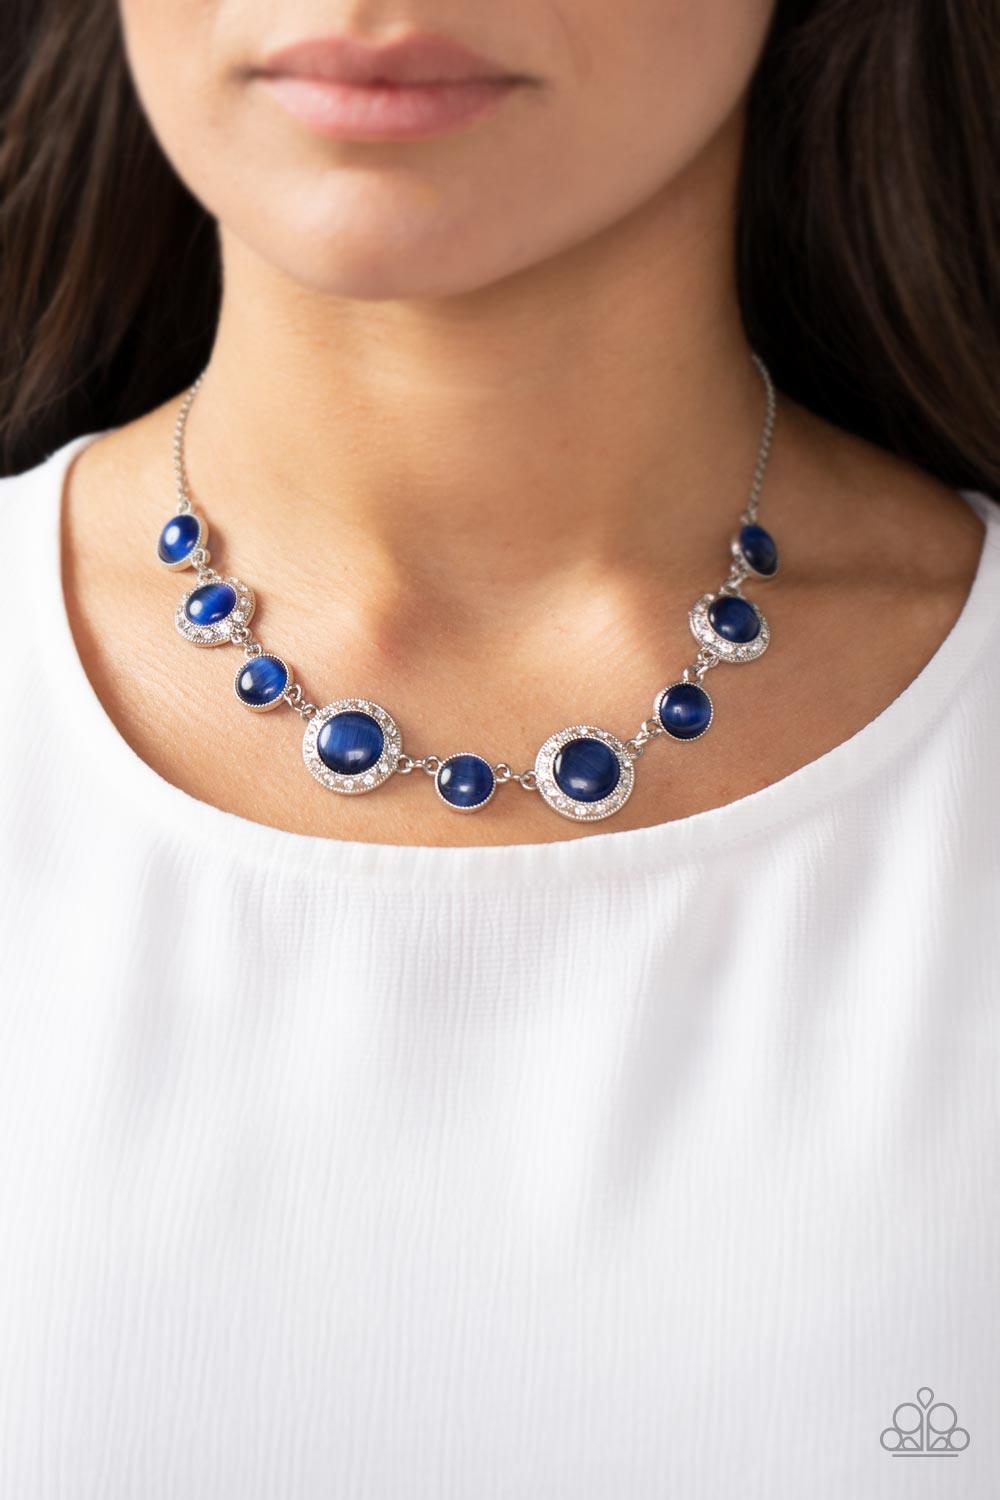 Too Good to BEAM True Blue Necklace - Jewelry by Bretta